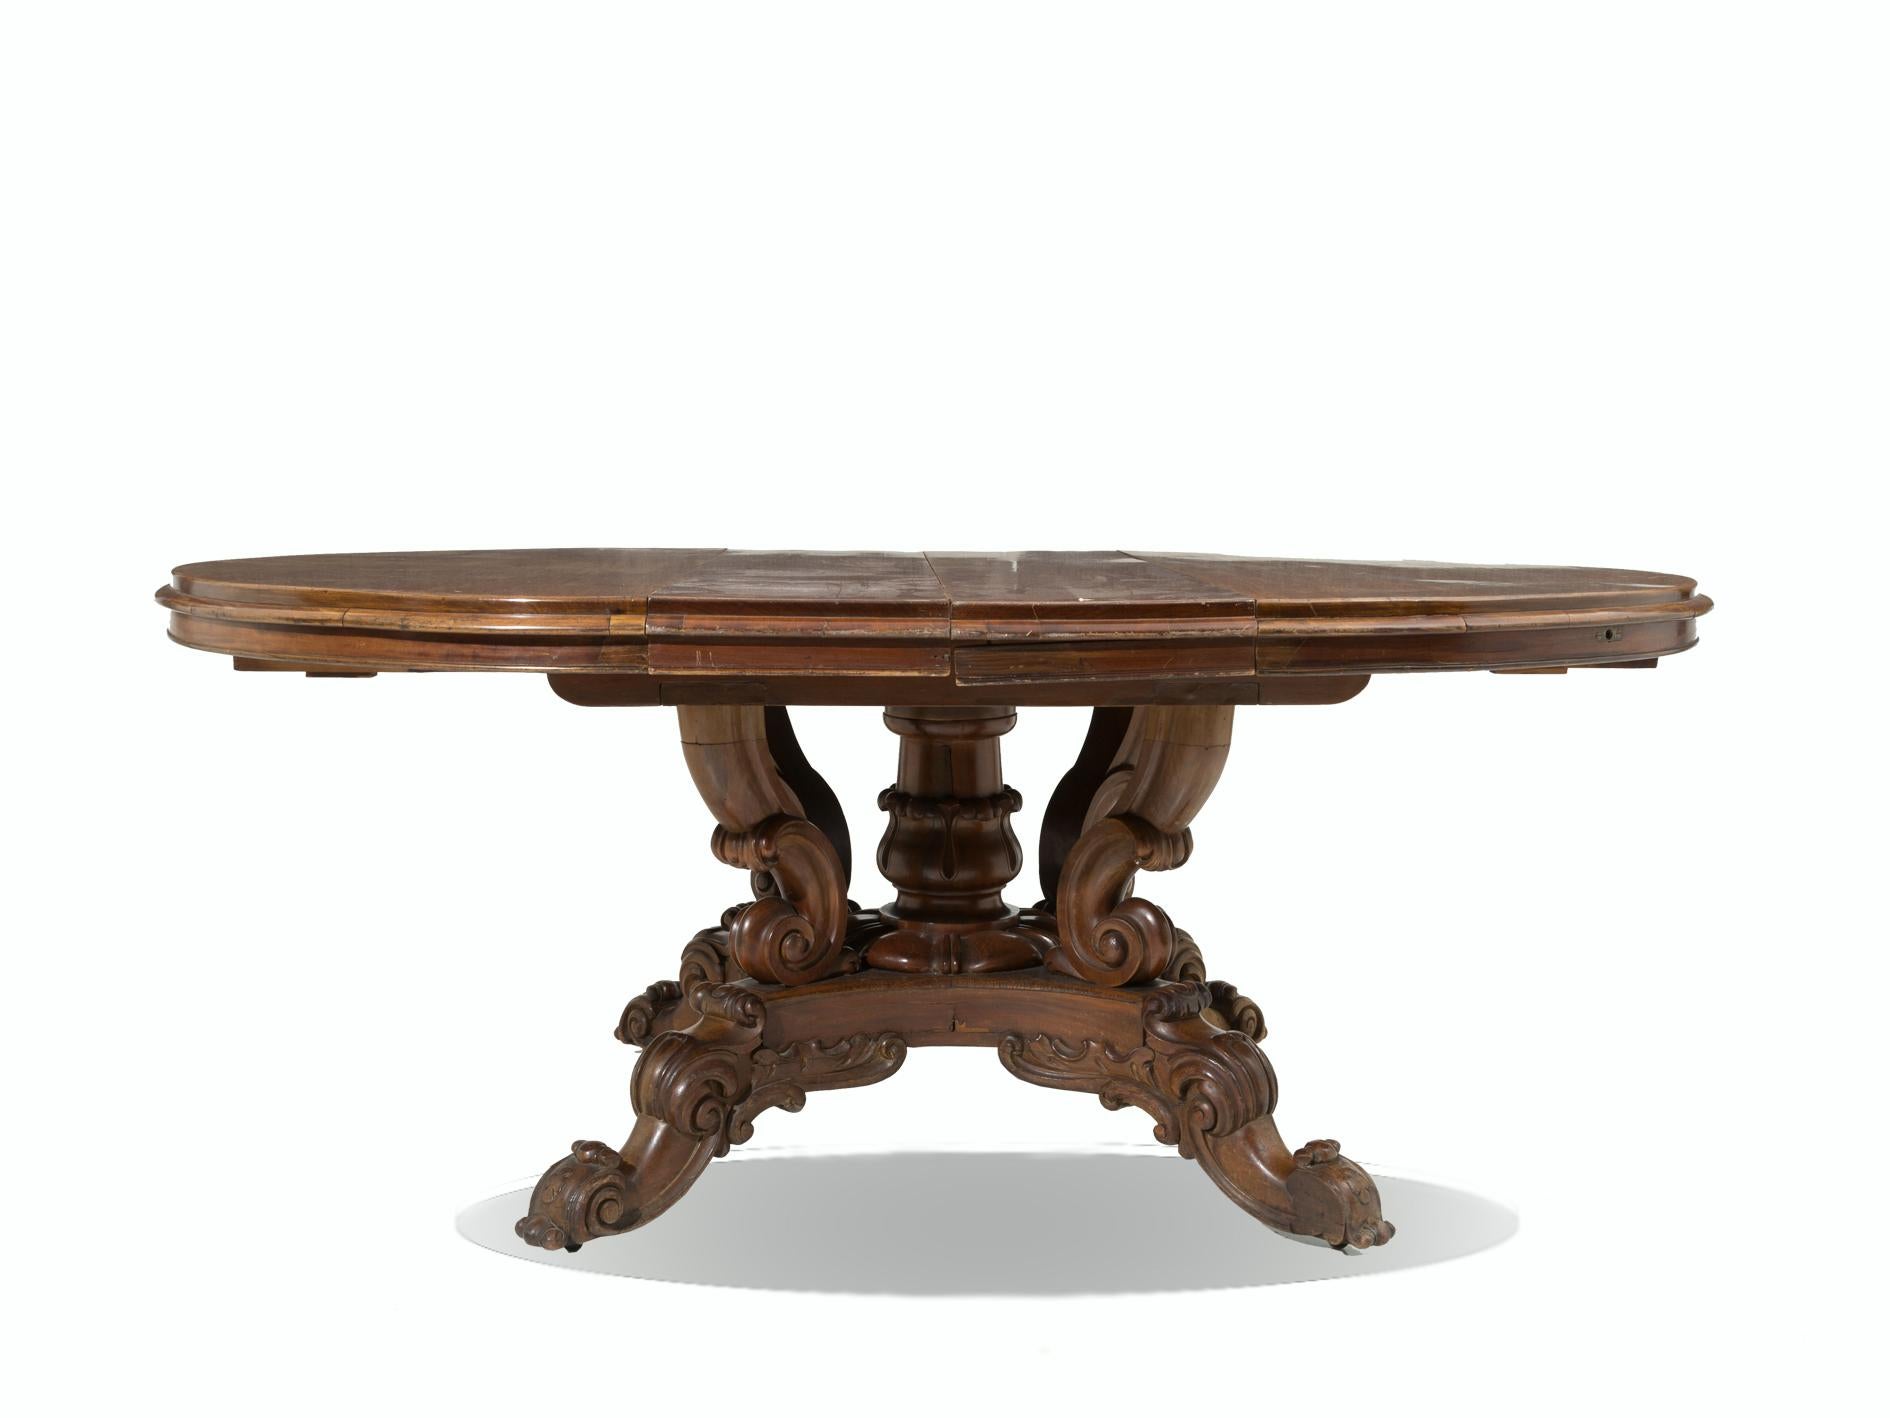 Elegant round table of 19th century, made of wood. The peculiarity of the table is that it is extendable in the center to allow more space for lunch, the table is supported by four wavy legs.
Solid and well made, the table is ideal for Classic and